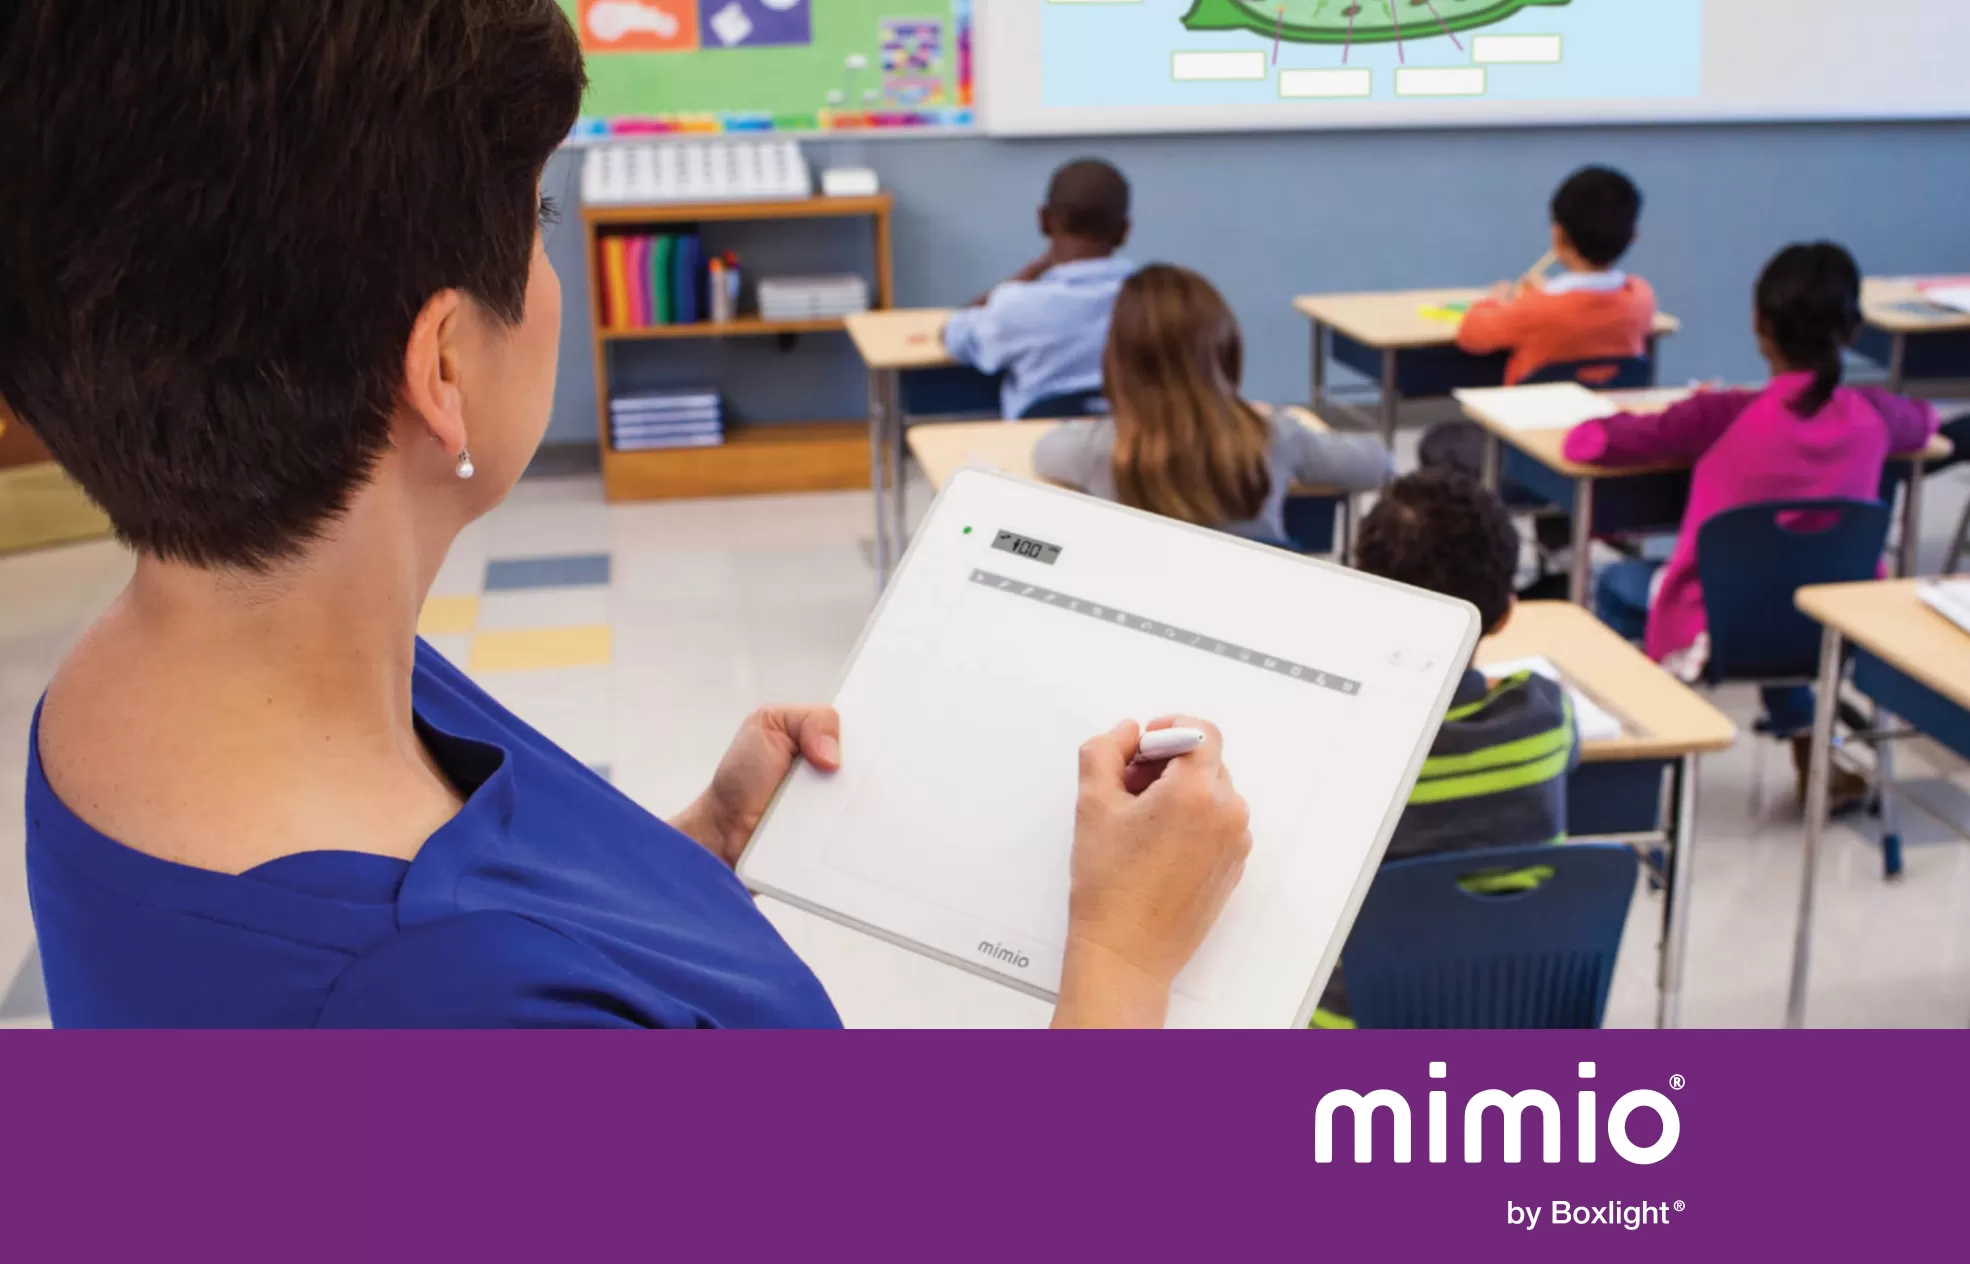 Teacher using MimioPad Wireless Pen Tablet in a classroom to write on the whiteboard. Purple banner saying 'mimio by boxlight' across the bottom